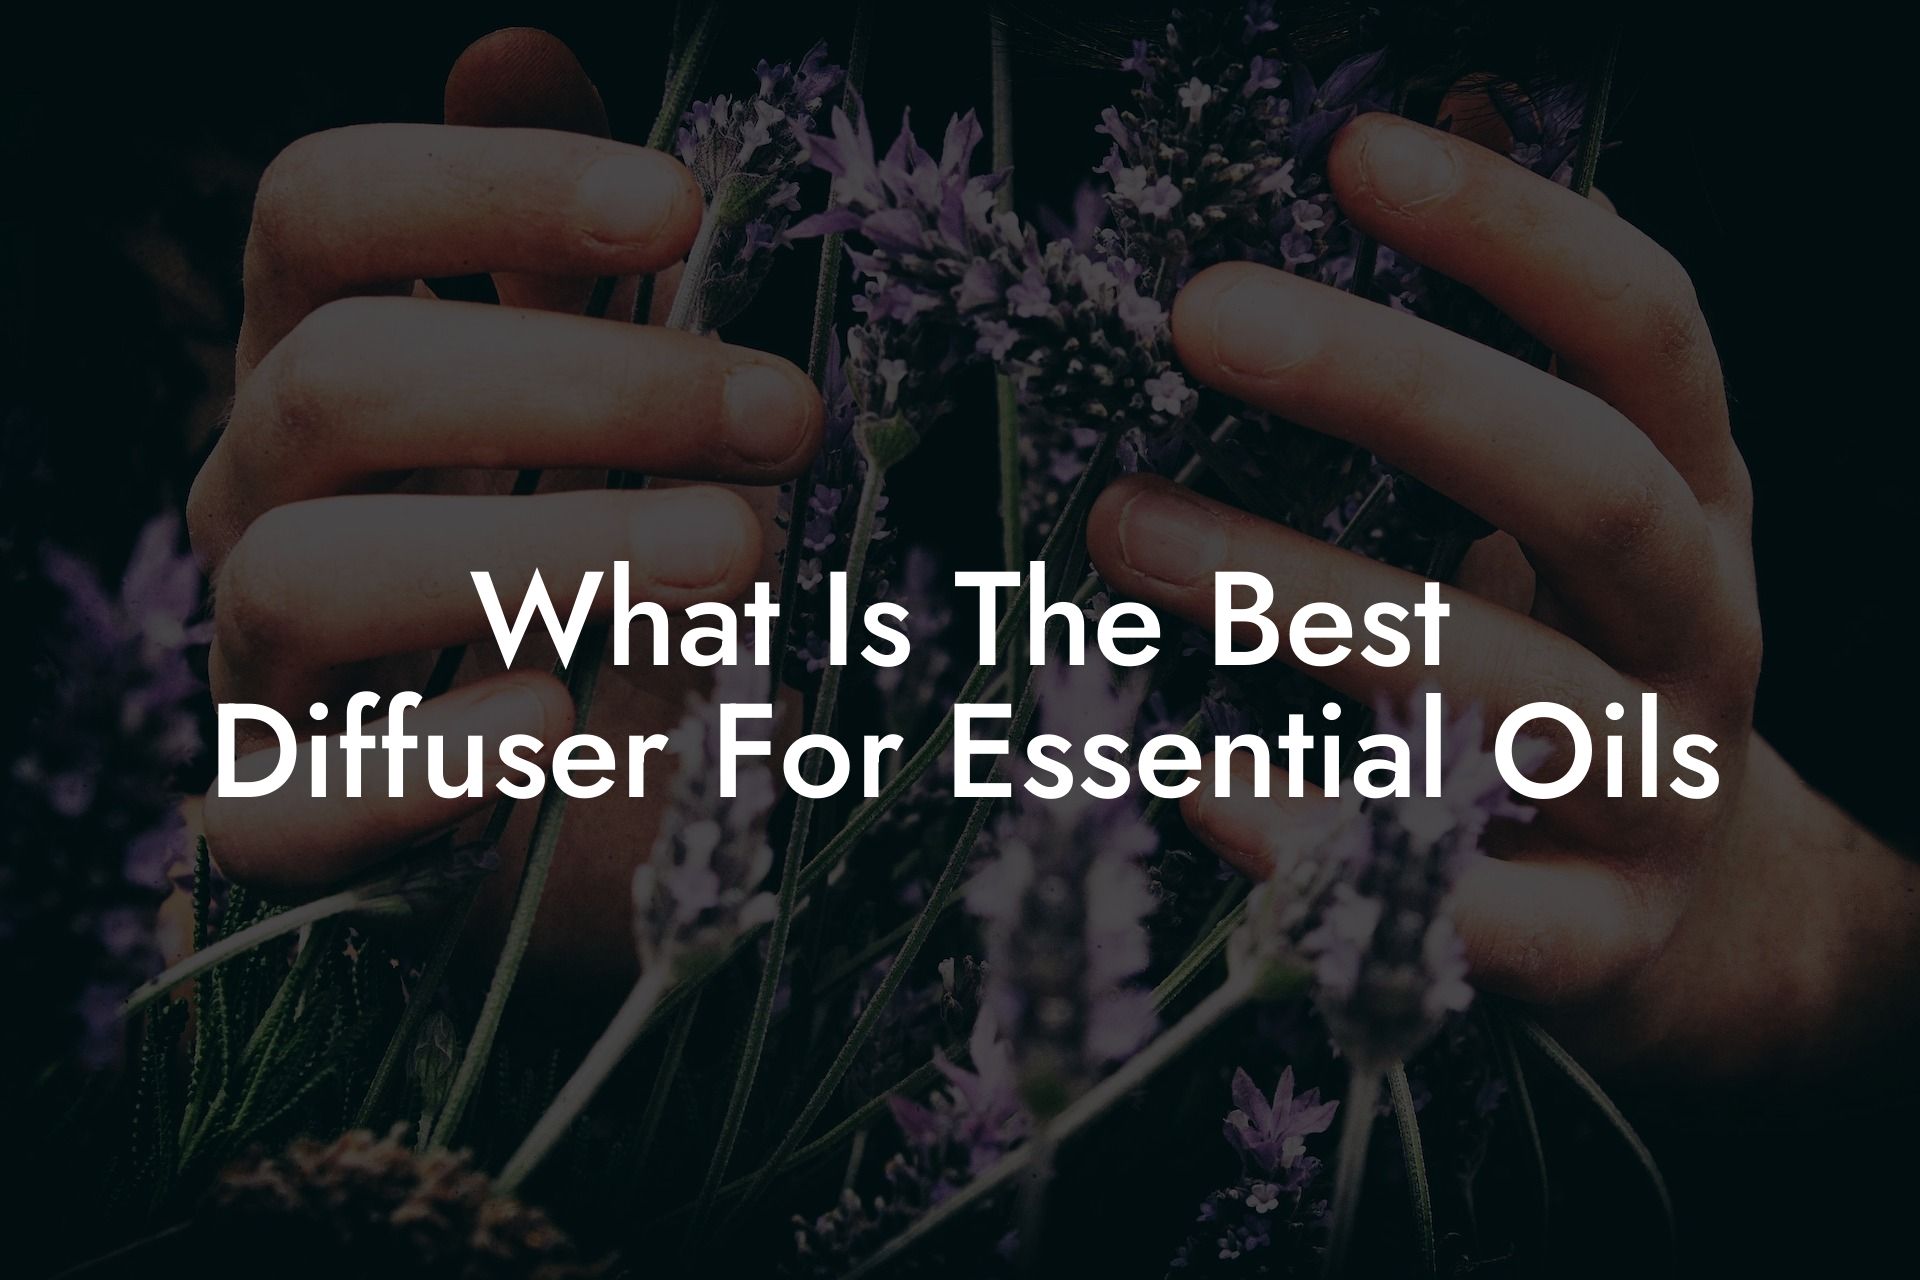 What Is The Best Diffuser For Essential Oils